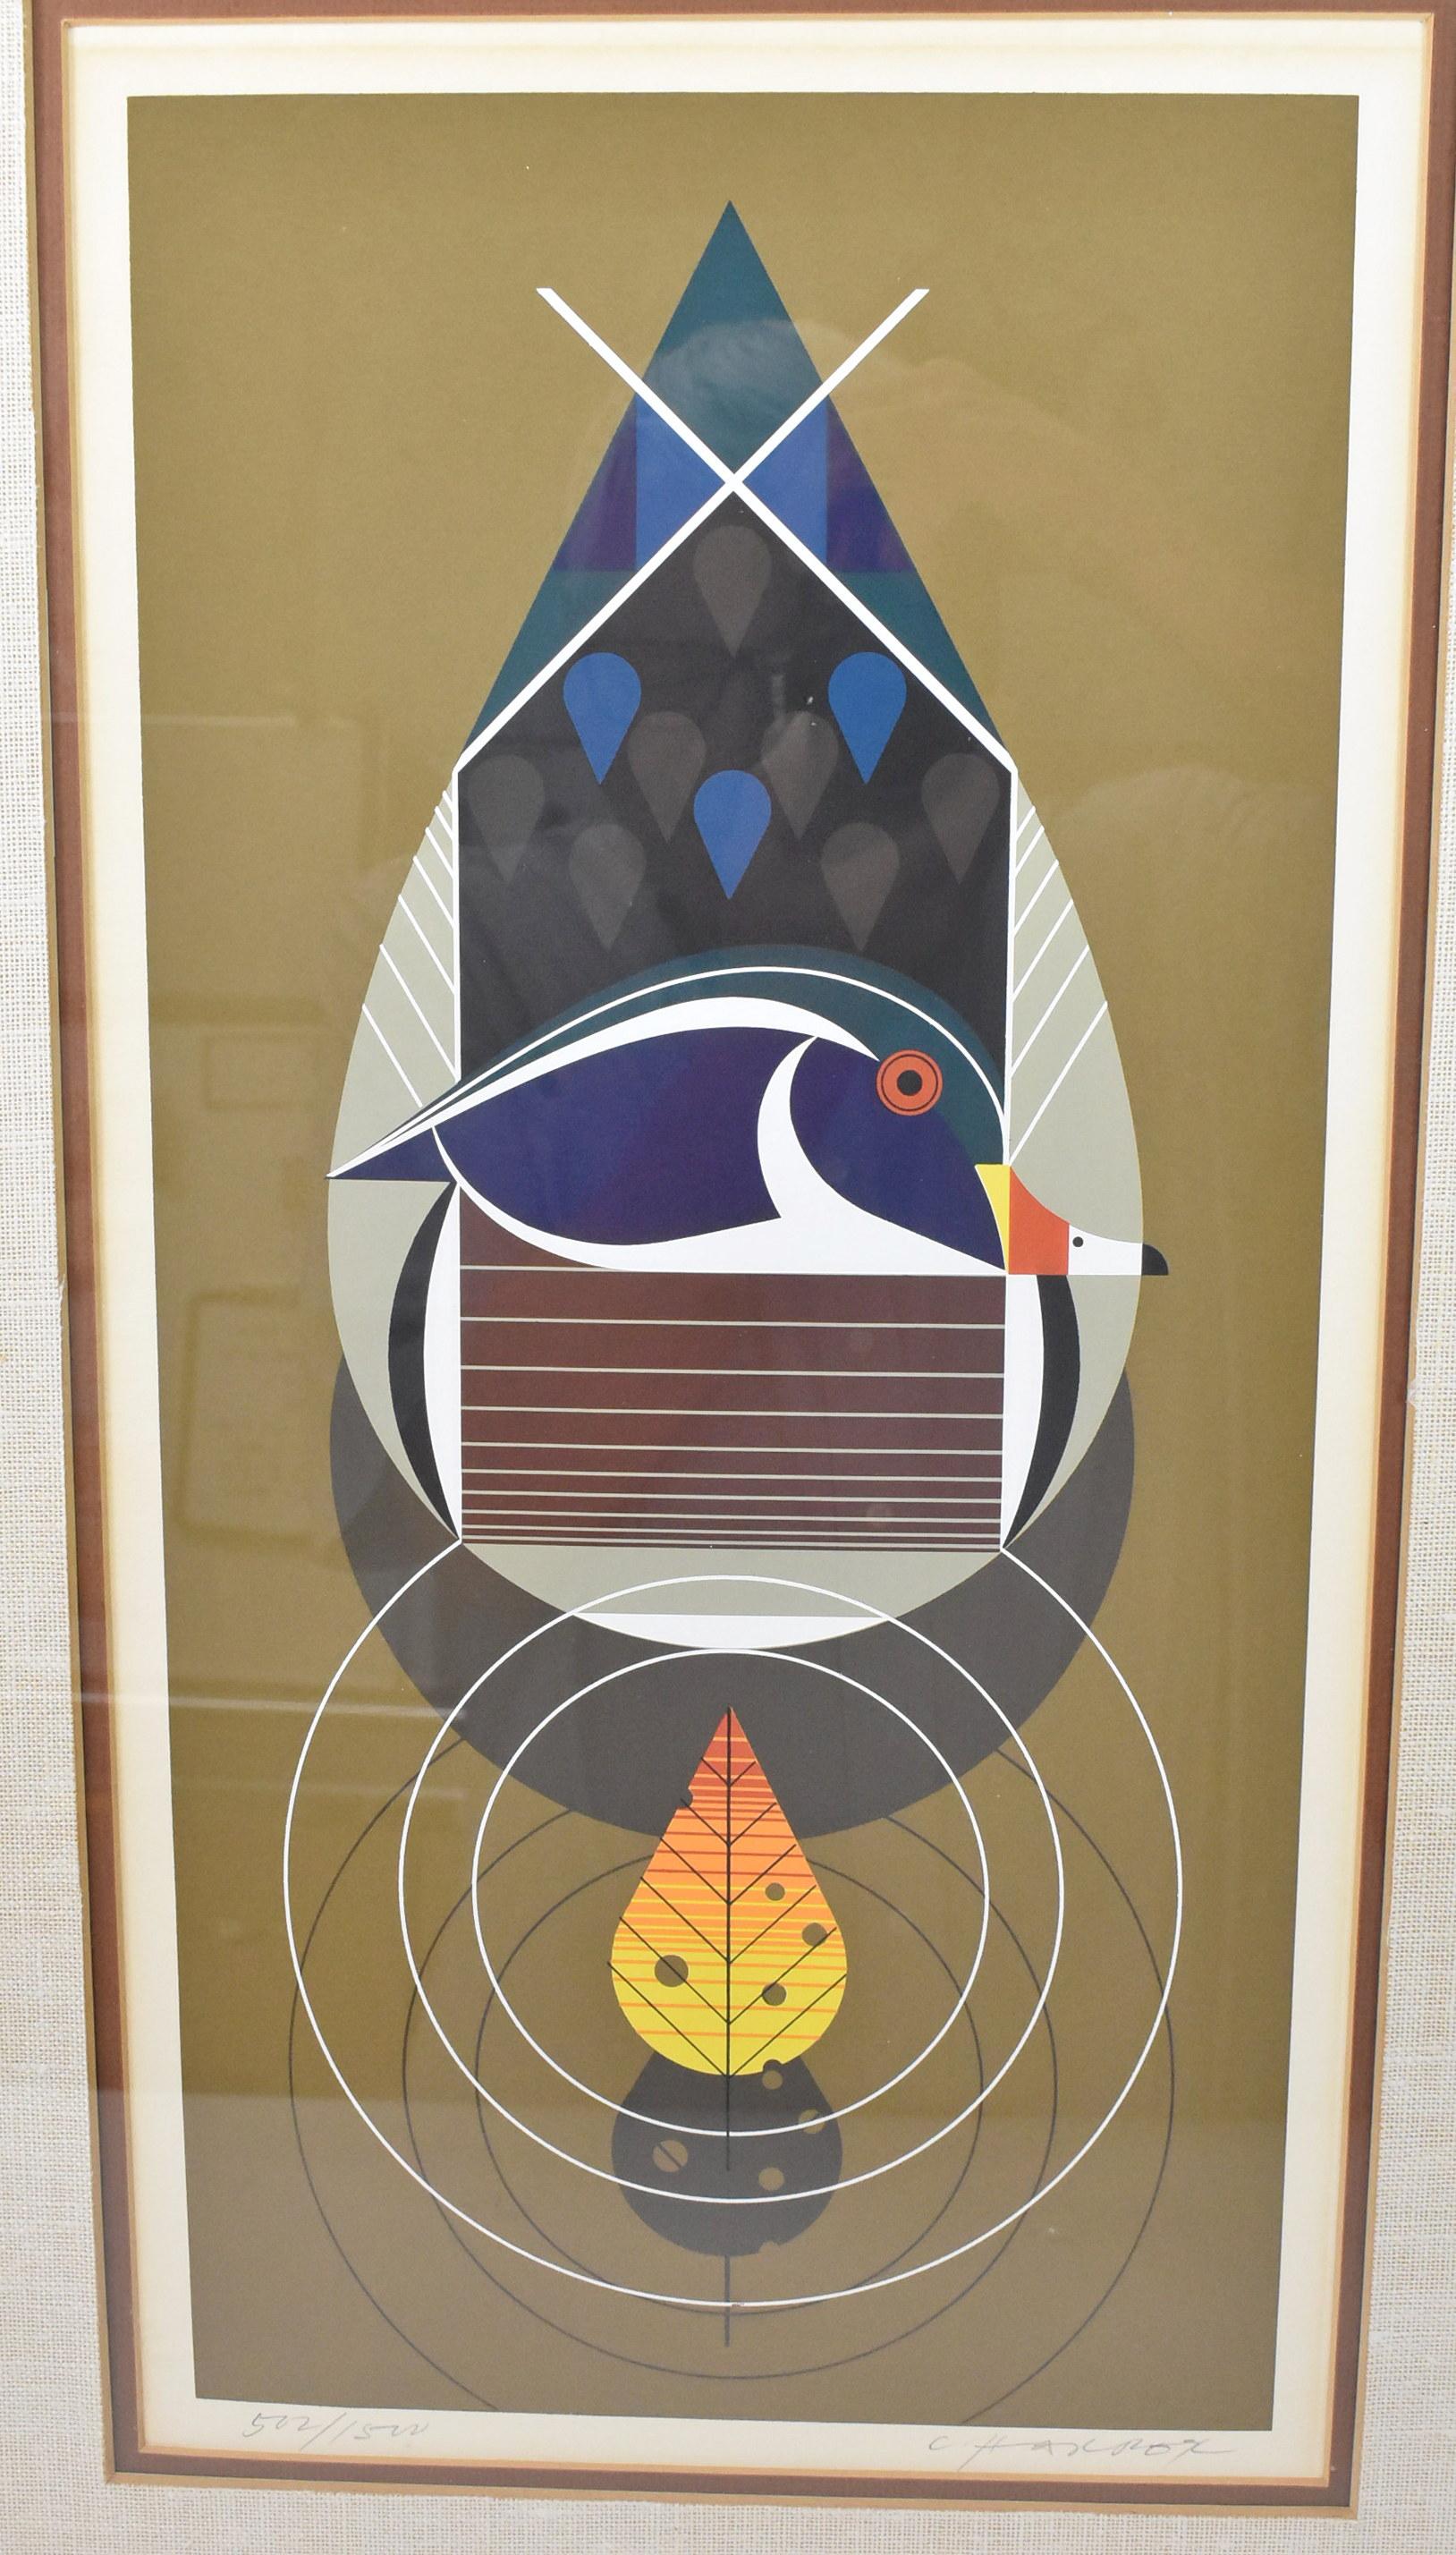 Charlie Harper Modern Serigraph of a Wood Duck. 1973 Framed Serigraph of a wood duck in Art Deco Style. Signed in lower righthand corner and from an edition 502/1500. Serigraph Series, No. 26. Excellent condition. Slight toning. Image measures 10